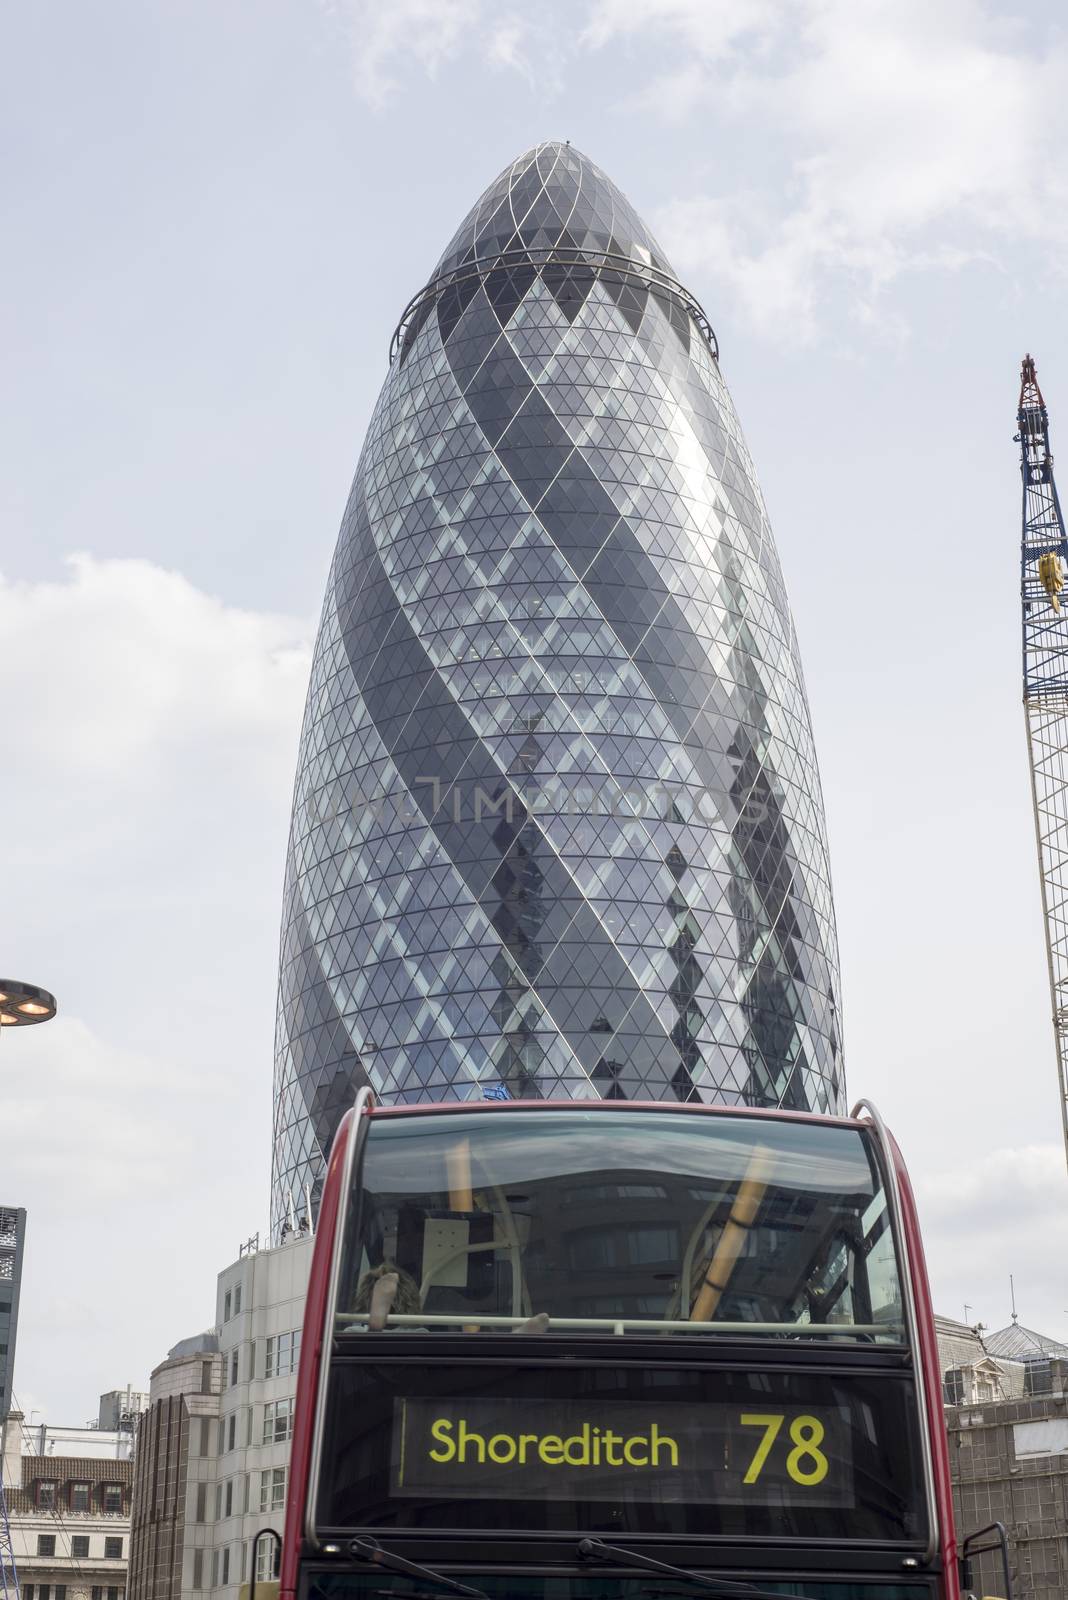 number 78 bus to shoreditch with the gherkin skyscraper by morrbyte